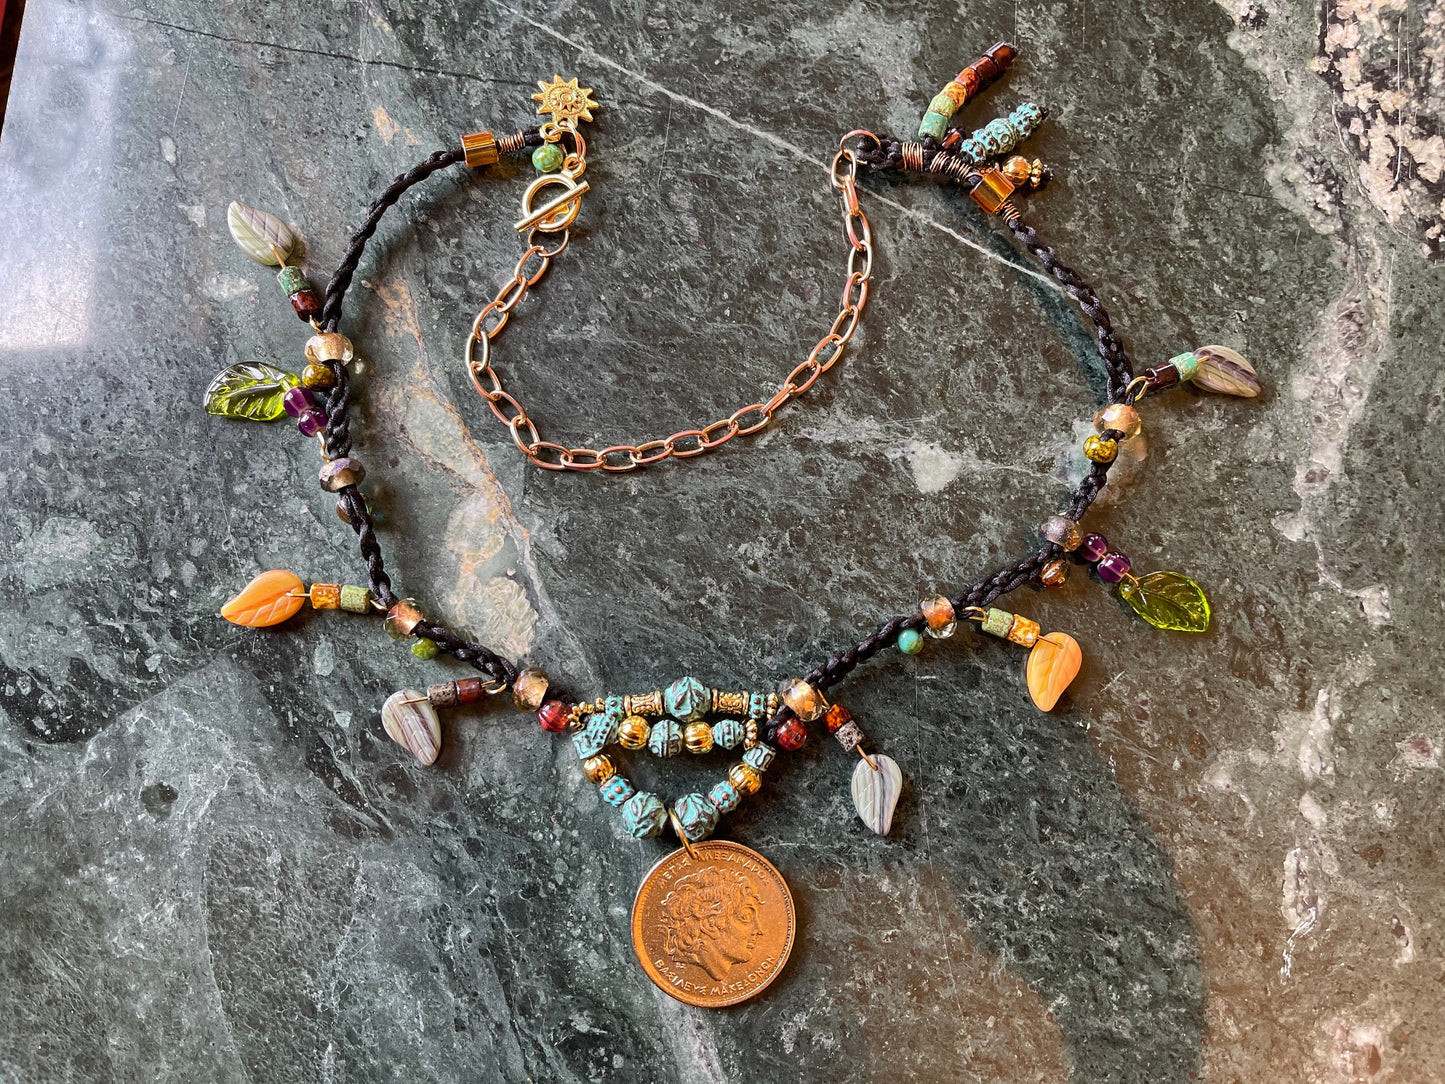 Alexander the Great genuine Greek coin pendant necklace, Czech glass leaves, copper beads (green patina) fire polished crystal, toggle clasp